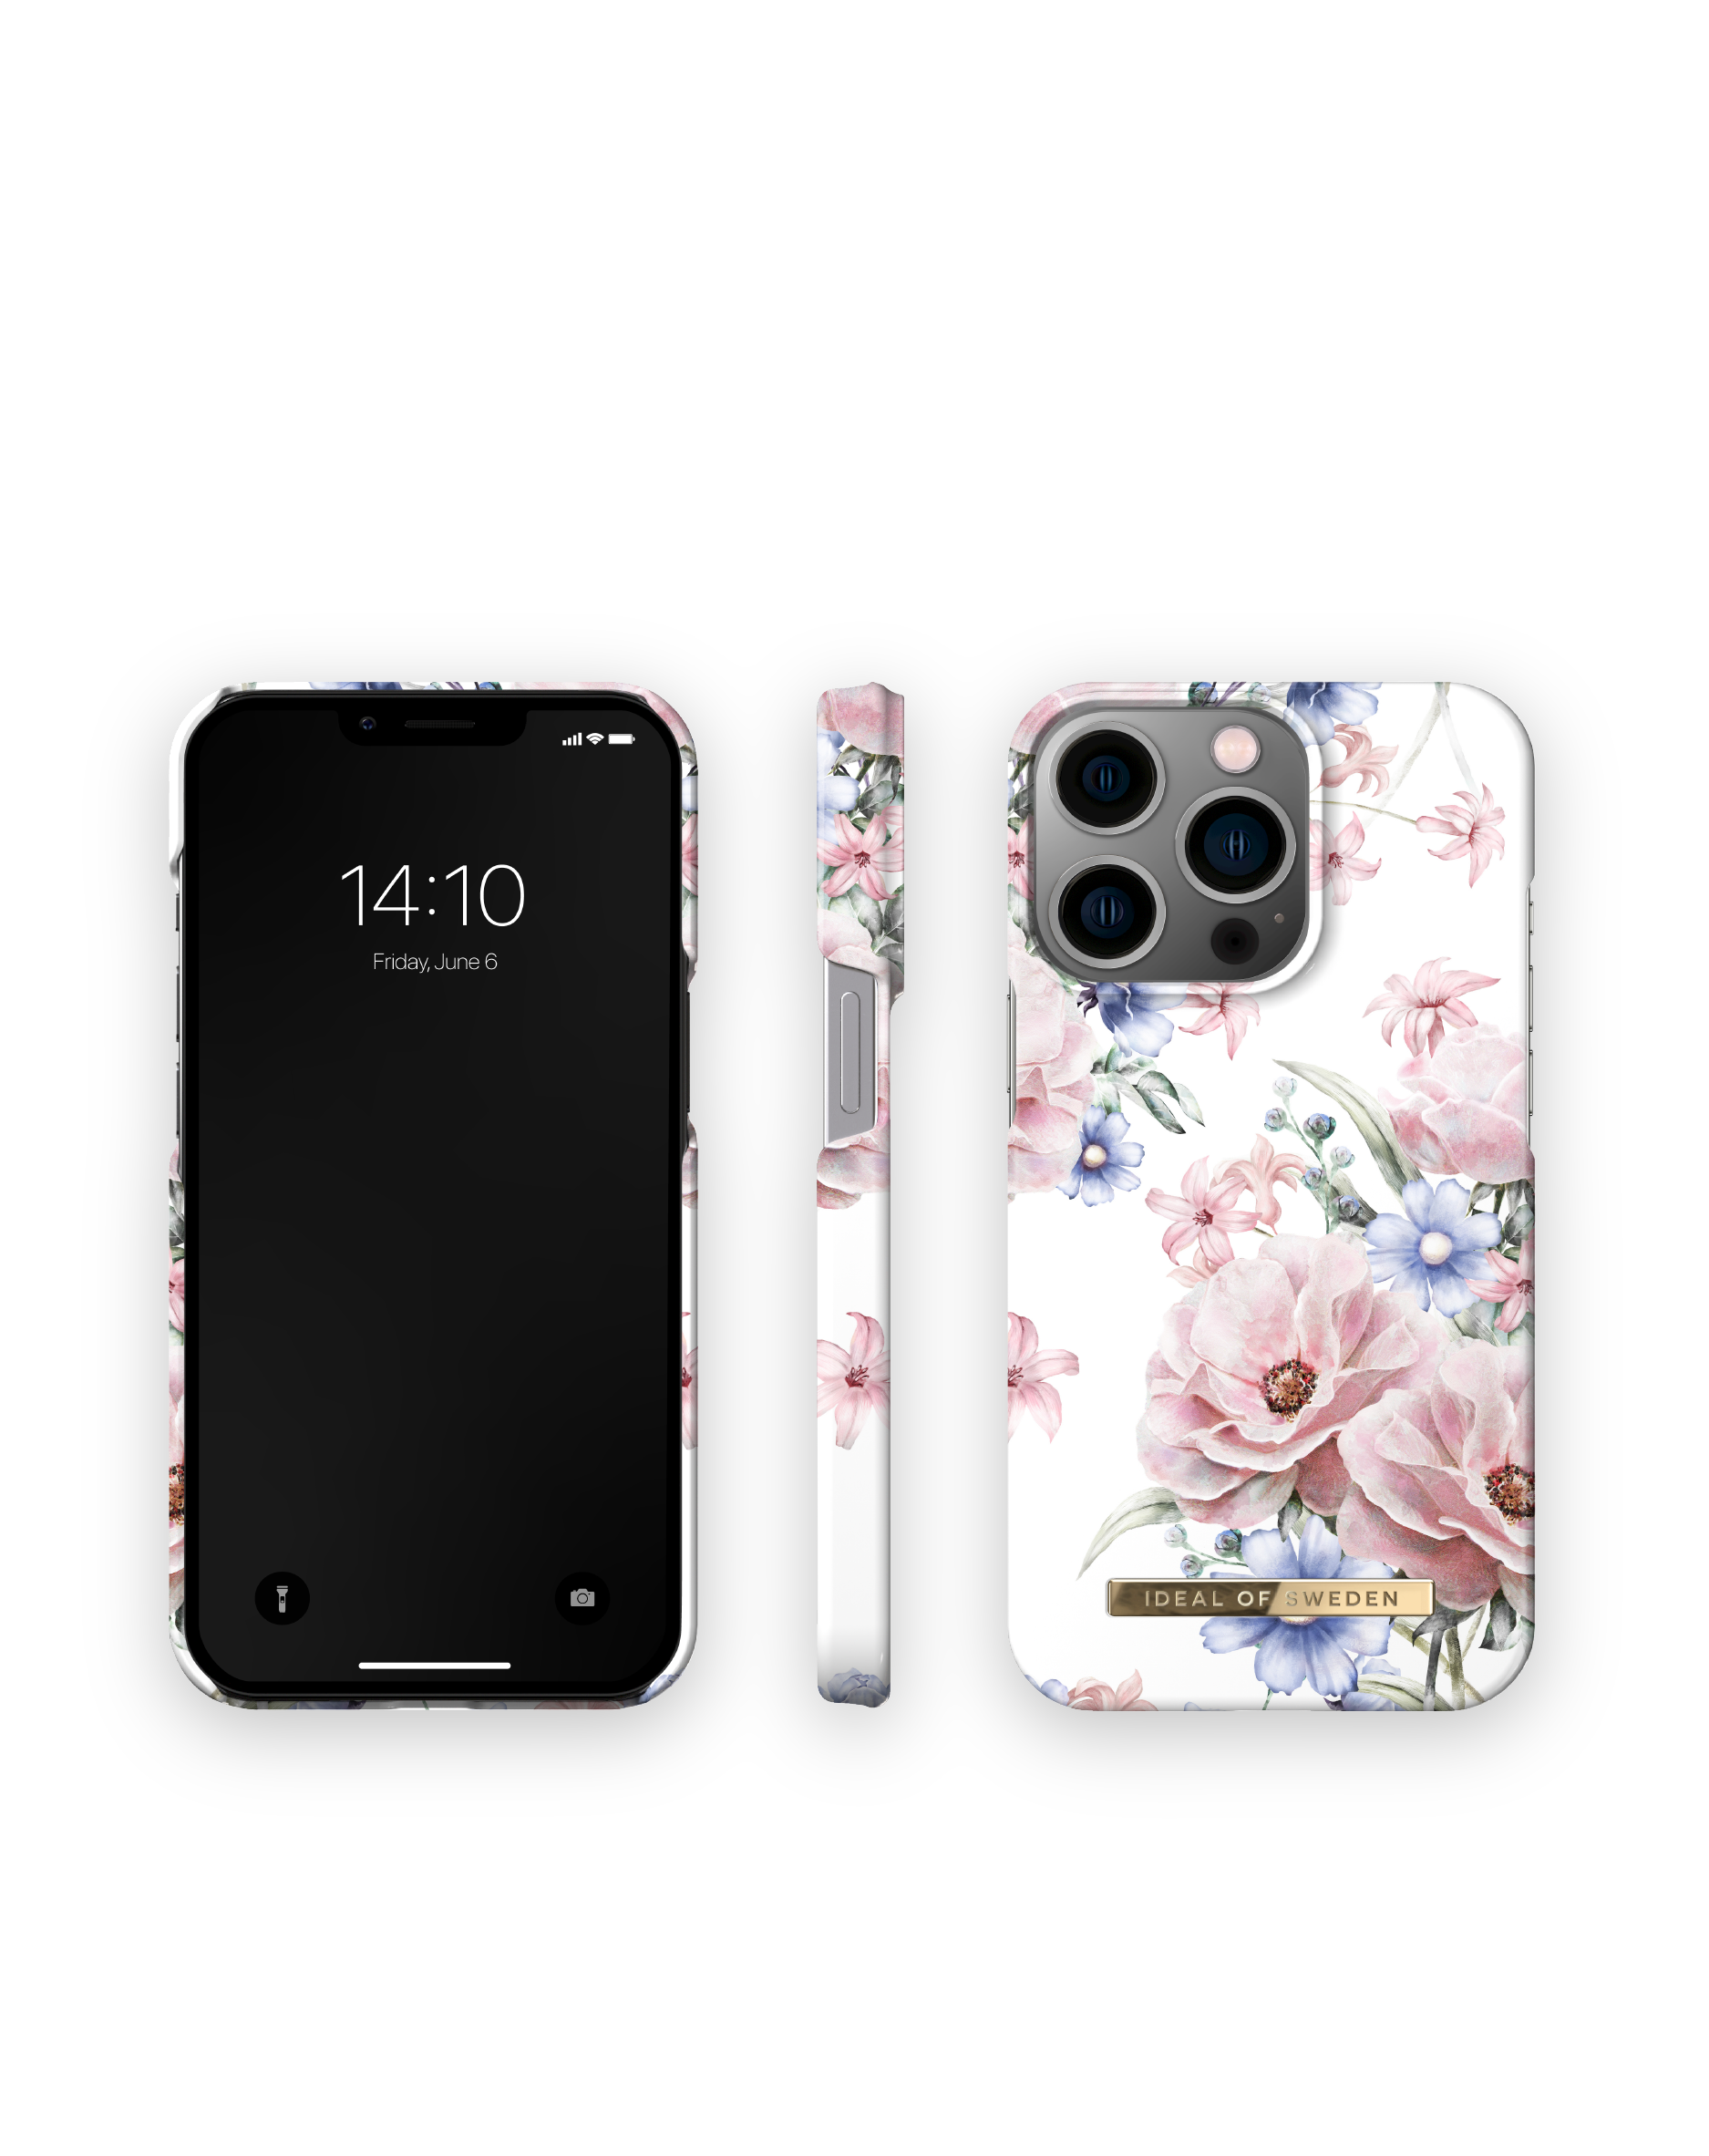 IDEAL OF Romance Pro, Apple, IDFCSS17-I2261P-58, 14 SWEDEN iPhone Floral Backcover